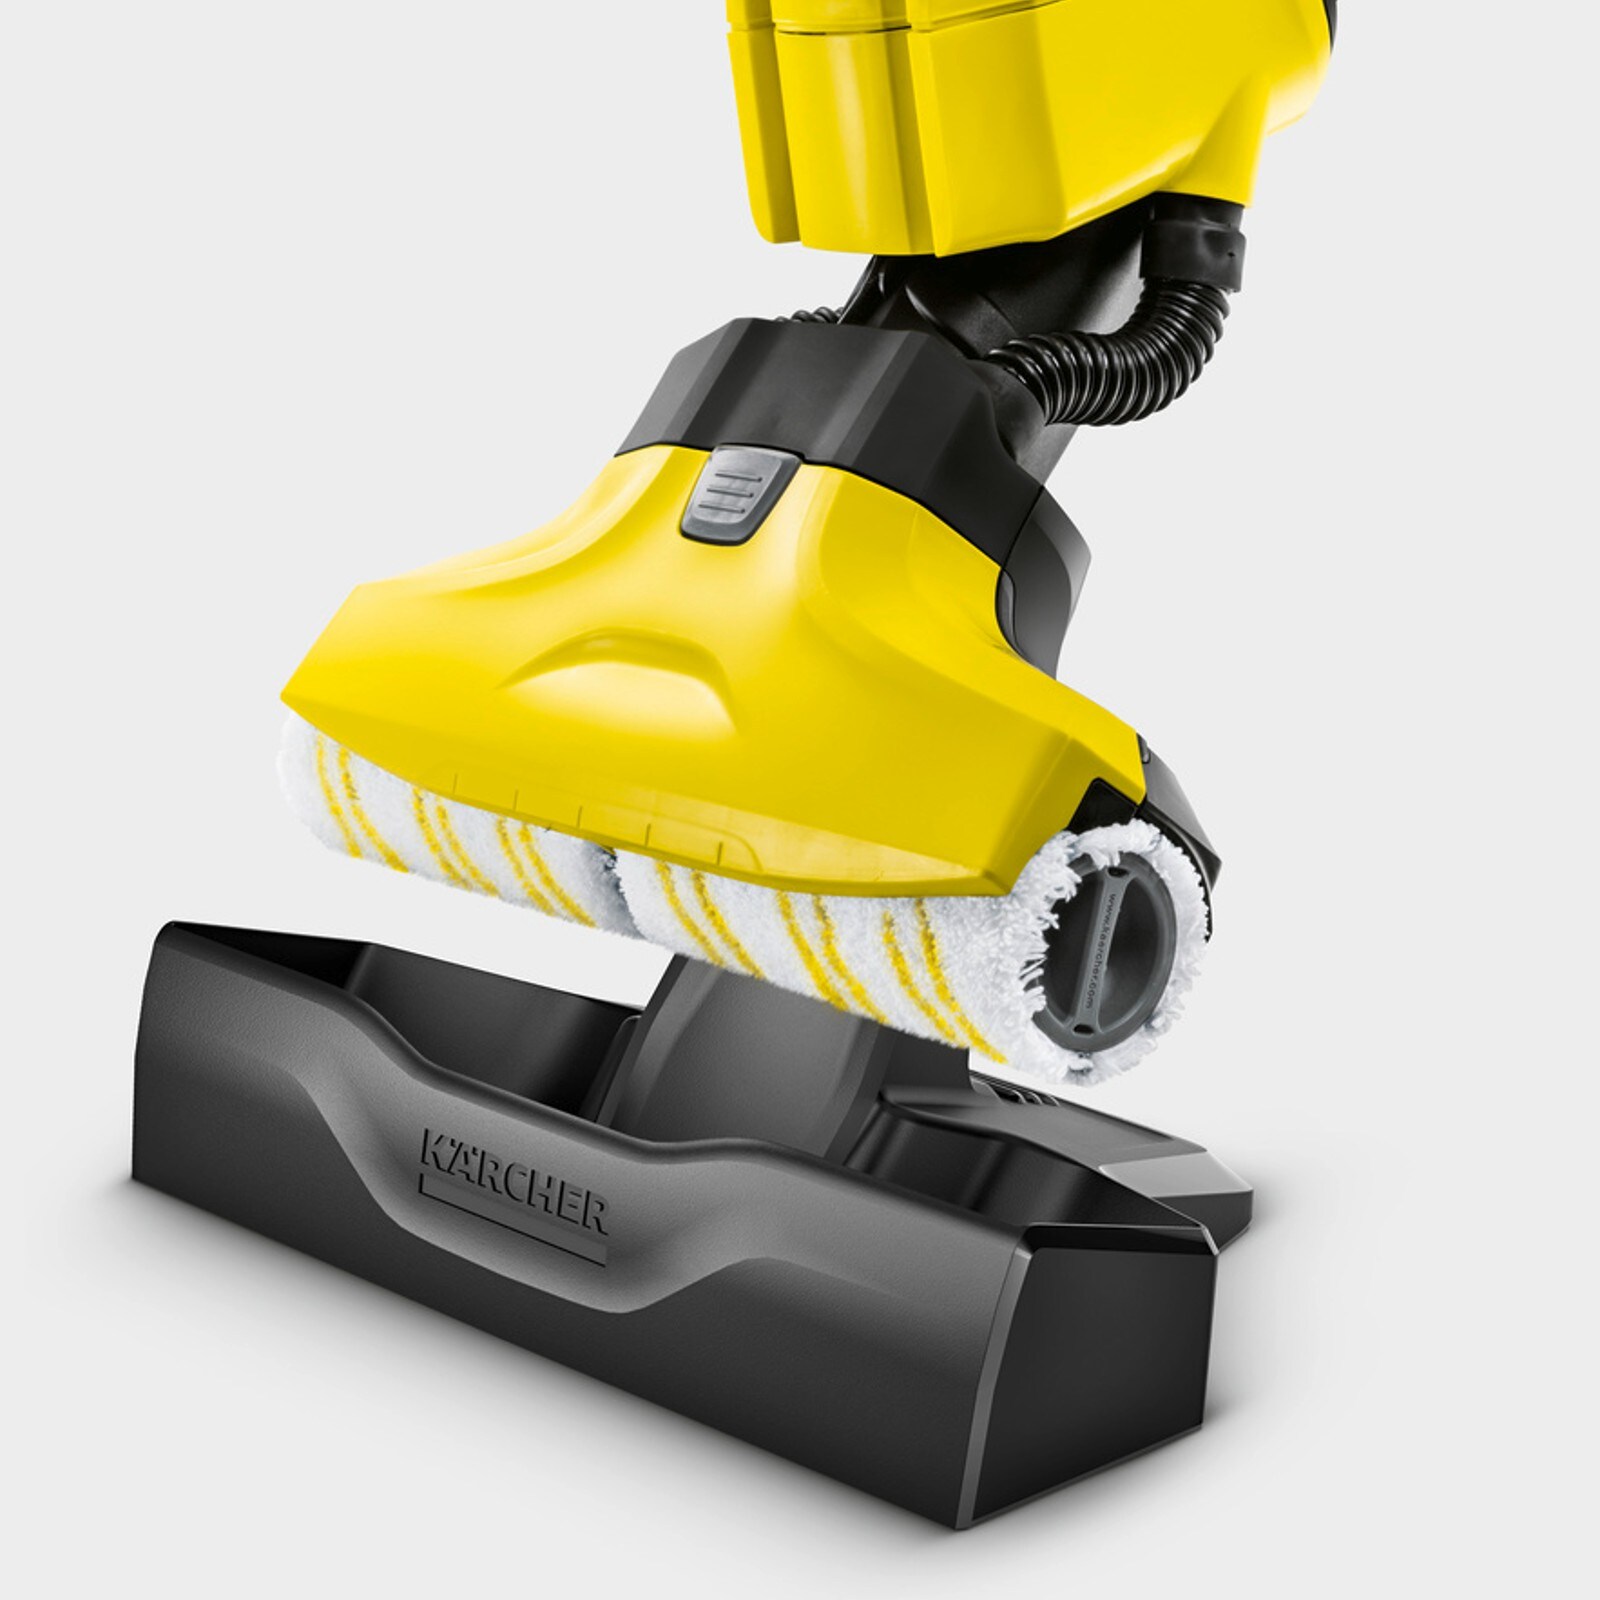 SICENXTOOLS Grout Cleaner Machine with Grout Brush,Heavy Duty with Wire  Surface Brush,Standy Safety Grout Scrubber,Moss,Weed Between Floor